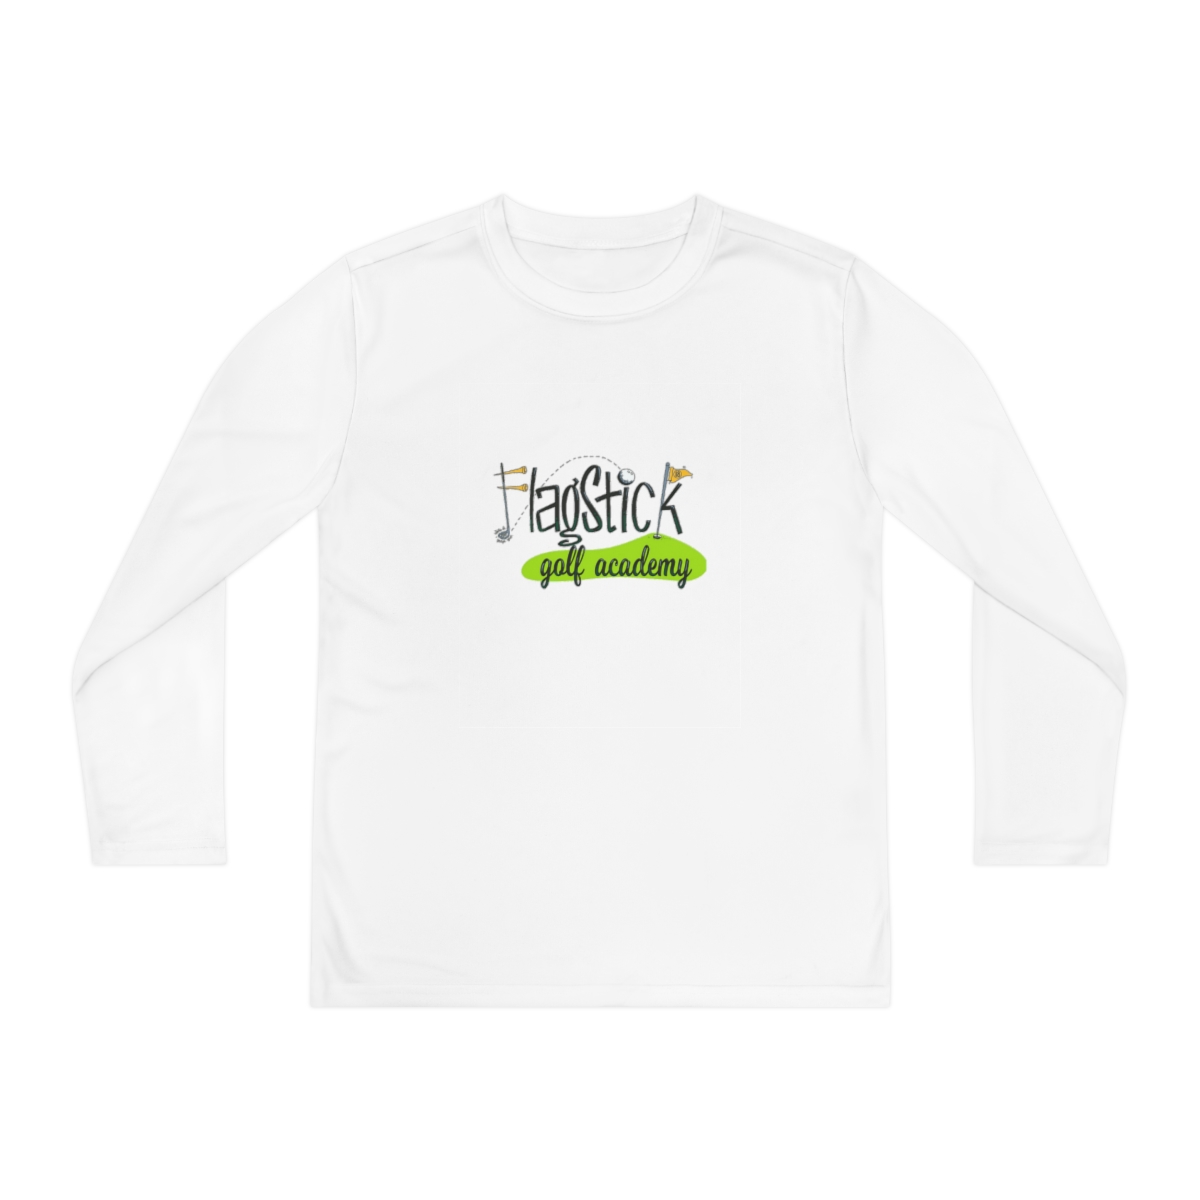 Youth Long Sleeve Competitor Tee product thumbnail image